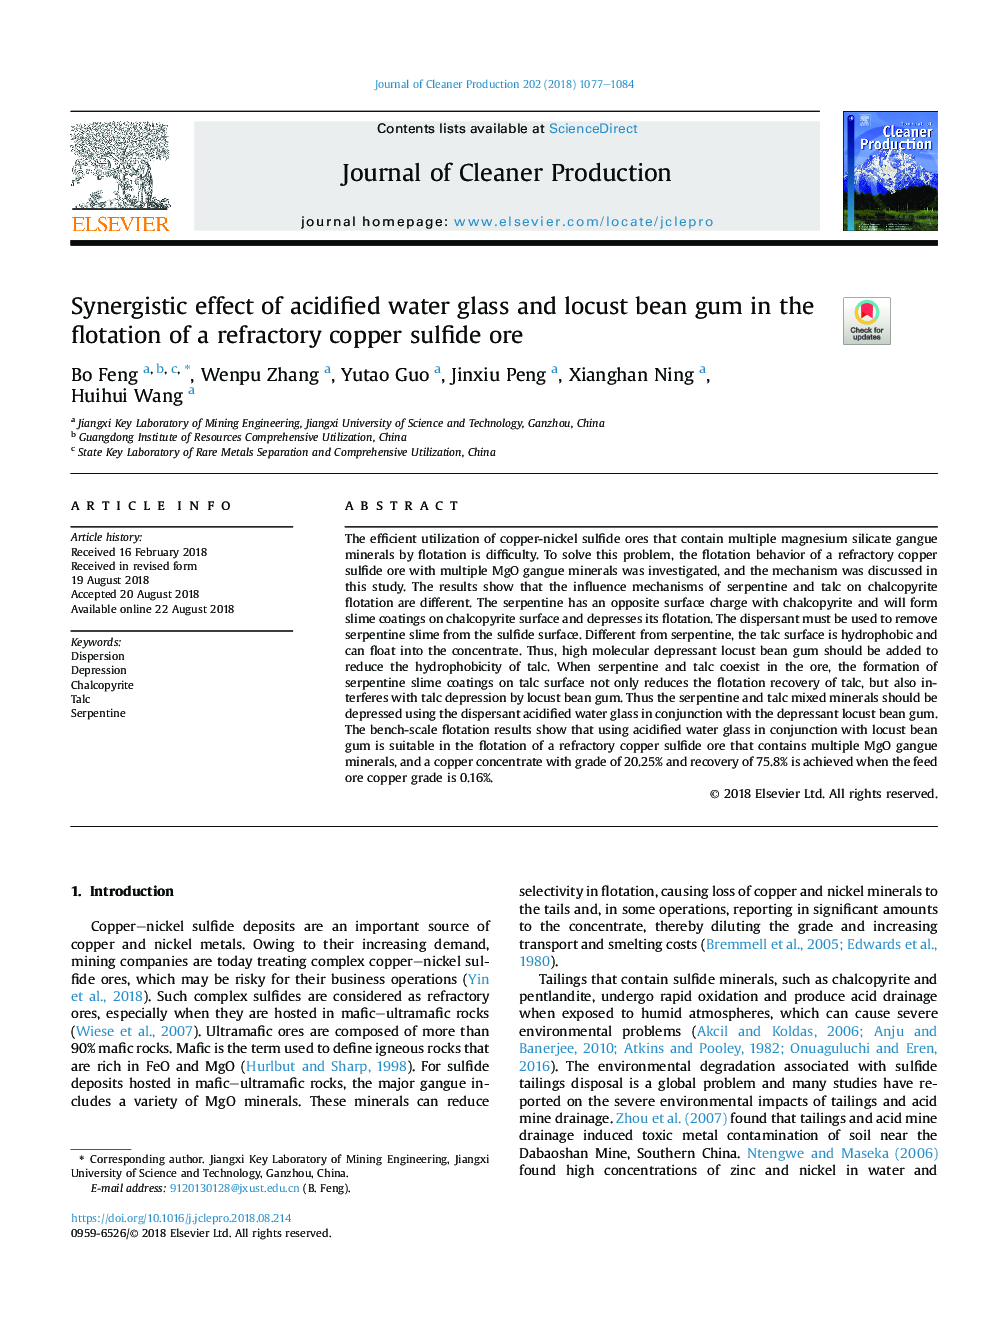 Synergistic effect of acidified water glass and locust bean gum in the flotation of a refractory copper sulfide ore